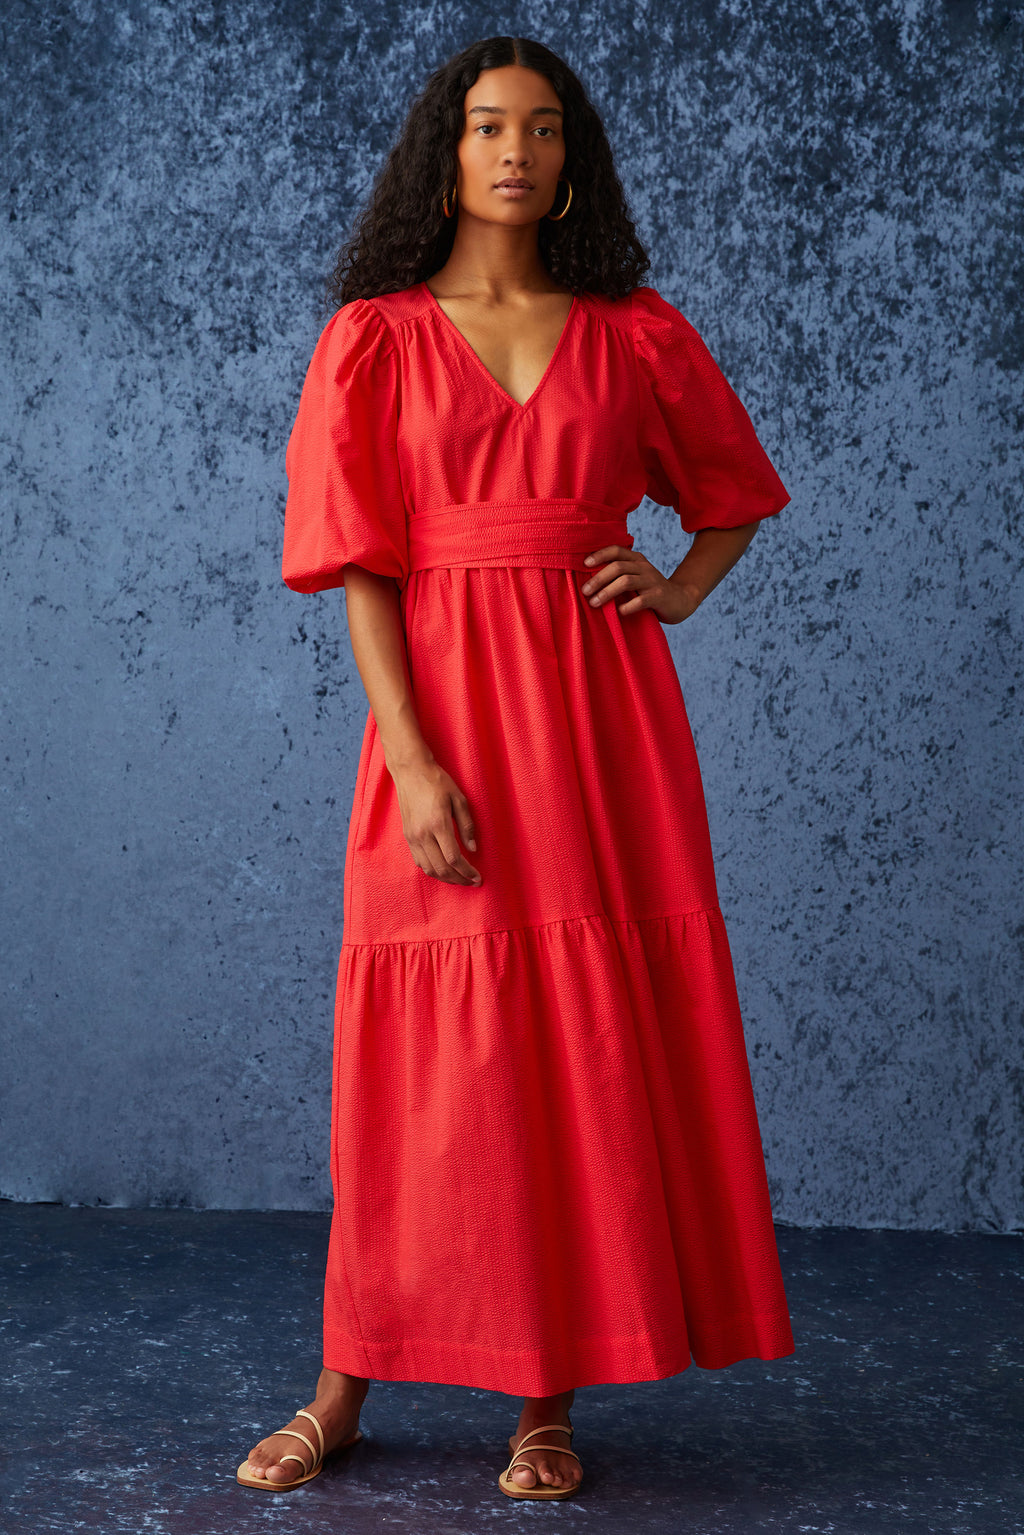 Bright red maxi dress with large puff sleeves and a v-neckline